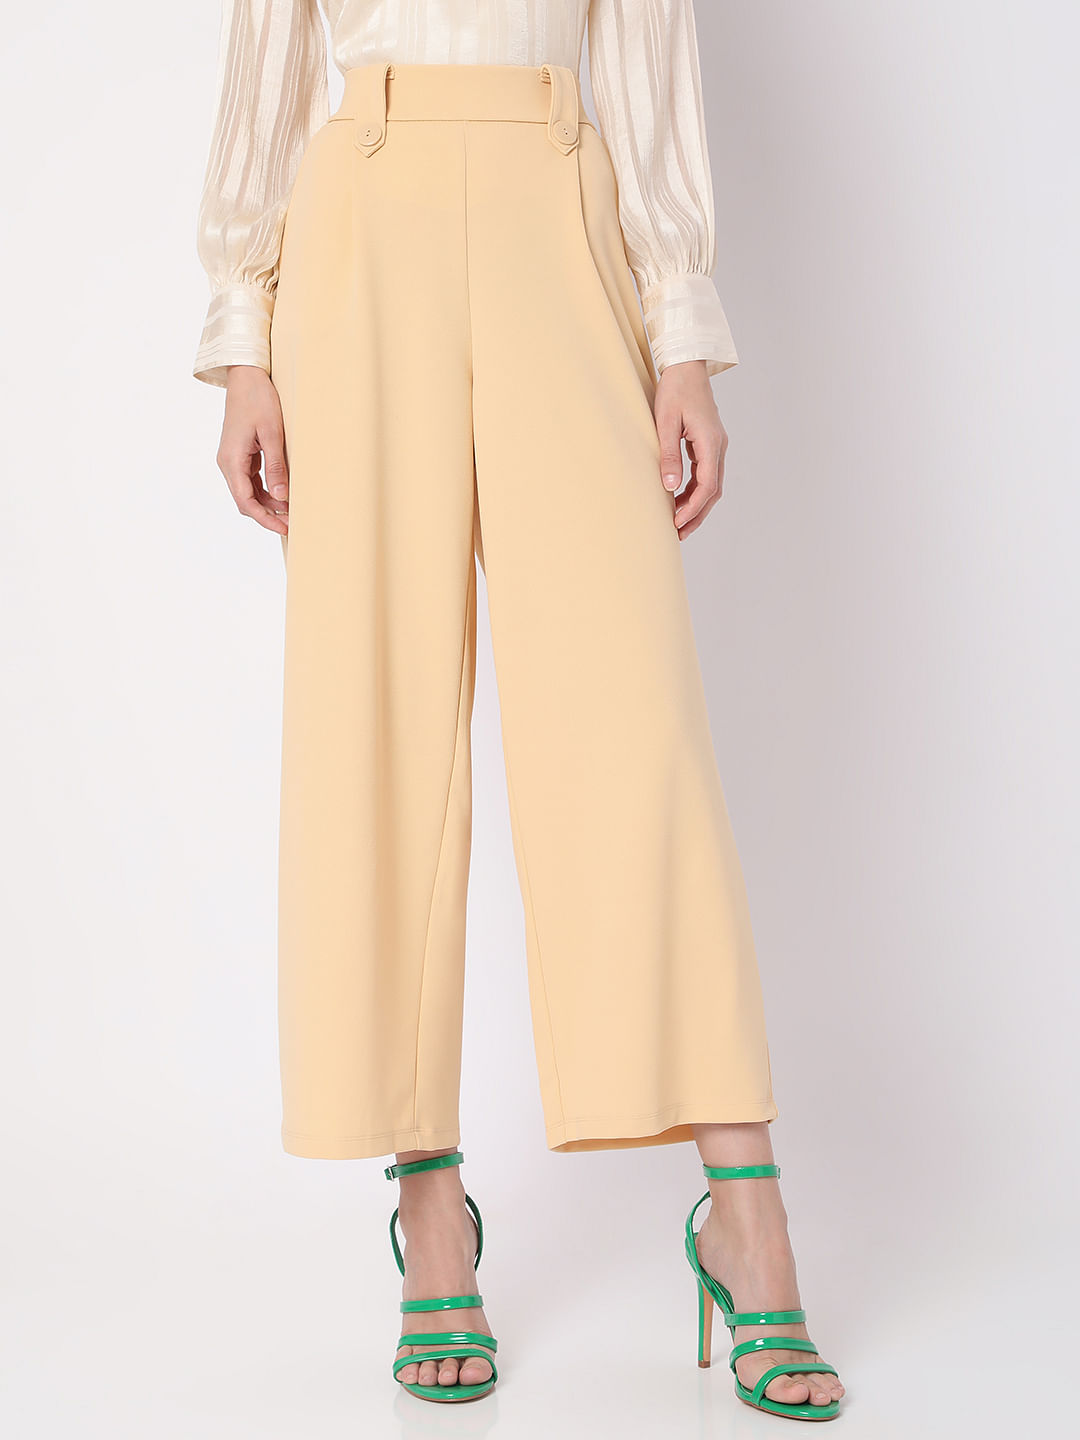 Culottes  Buy Culottes  Culotte Pants Online For Women at Best Prices in  India  Flipkartcom